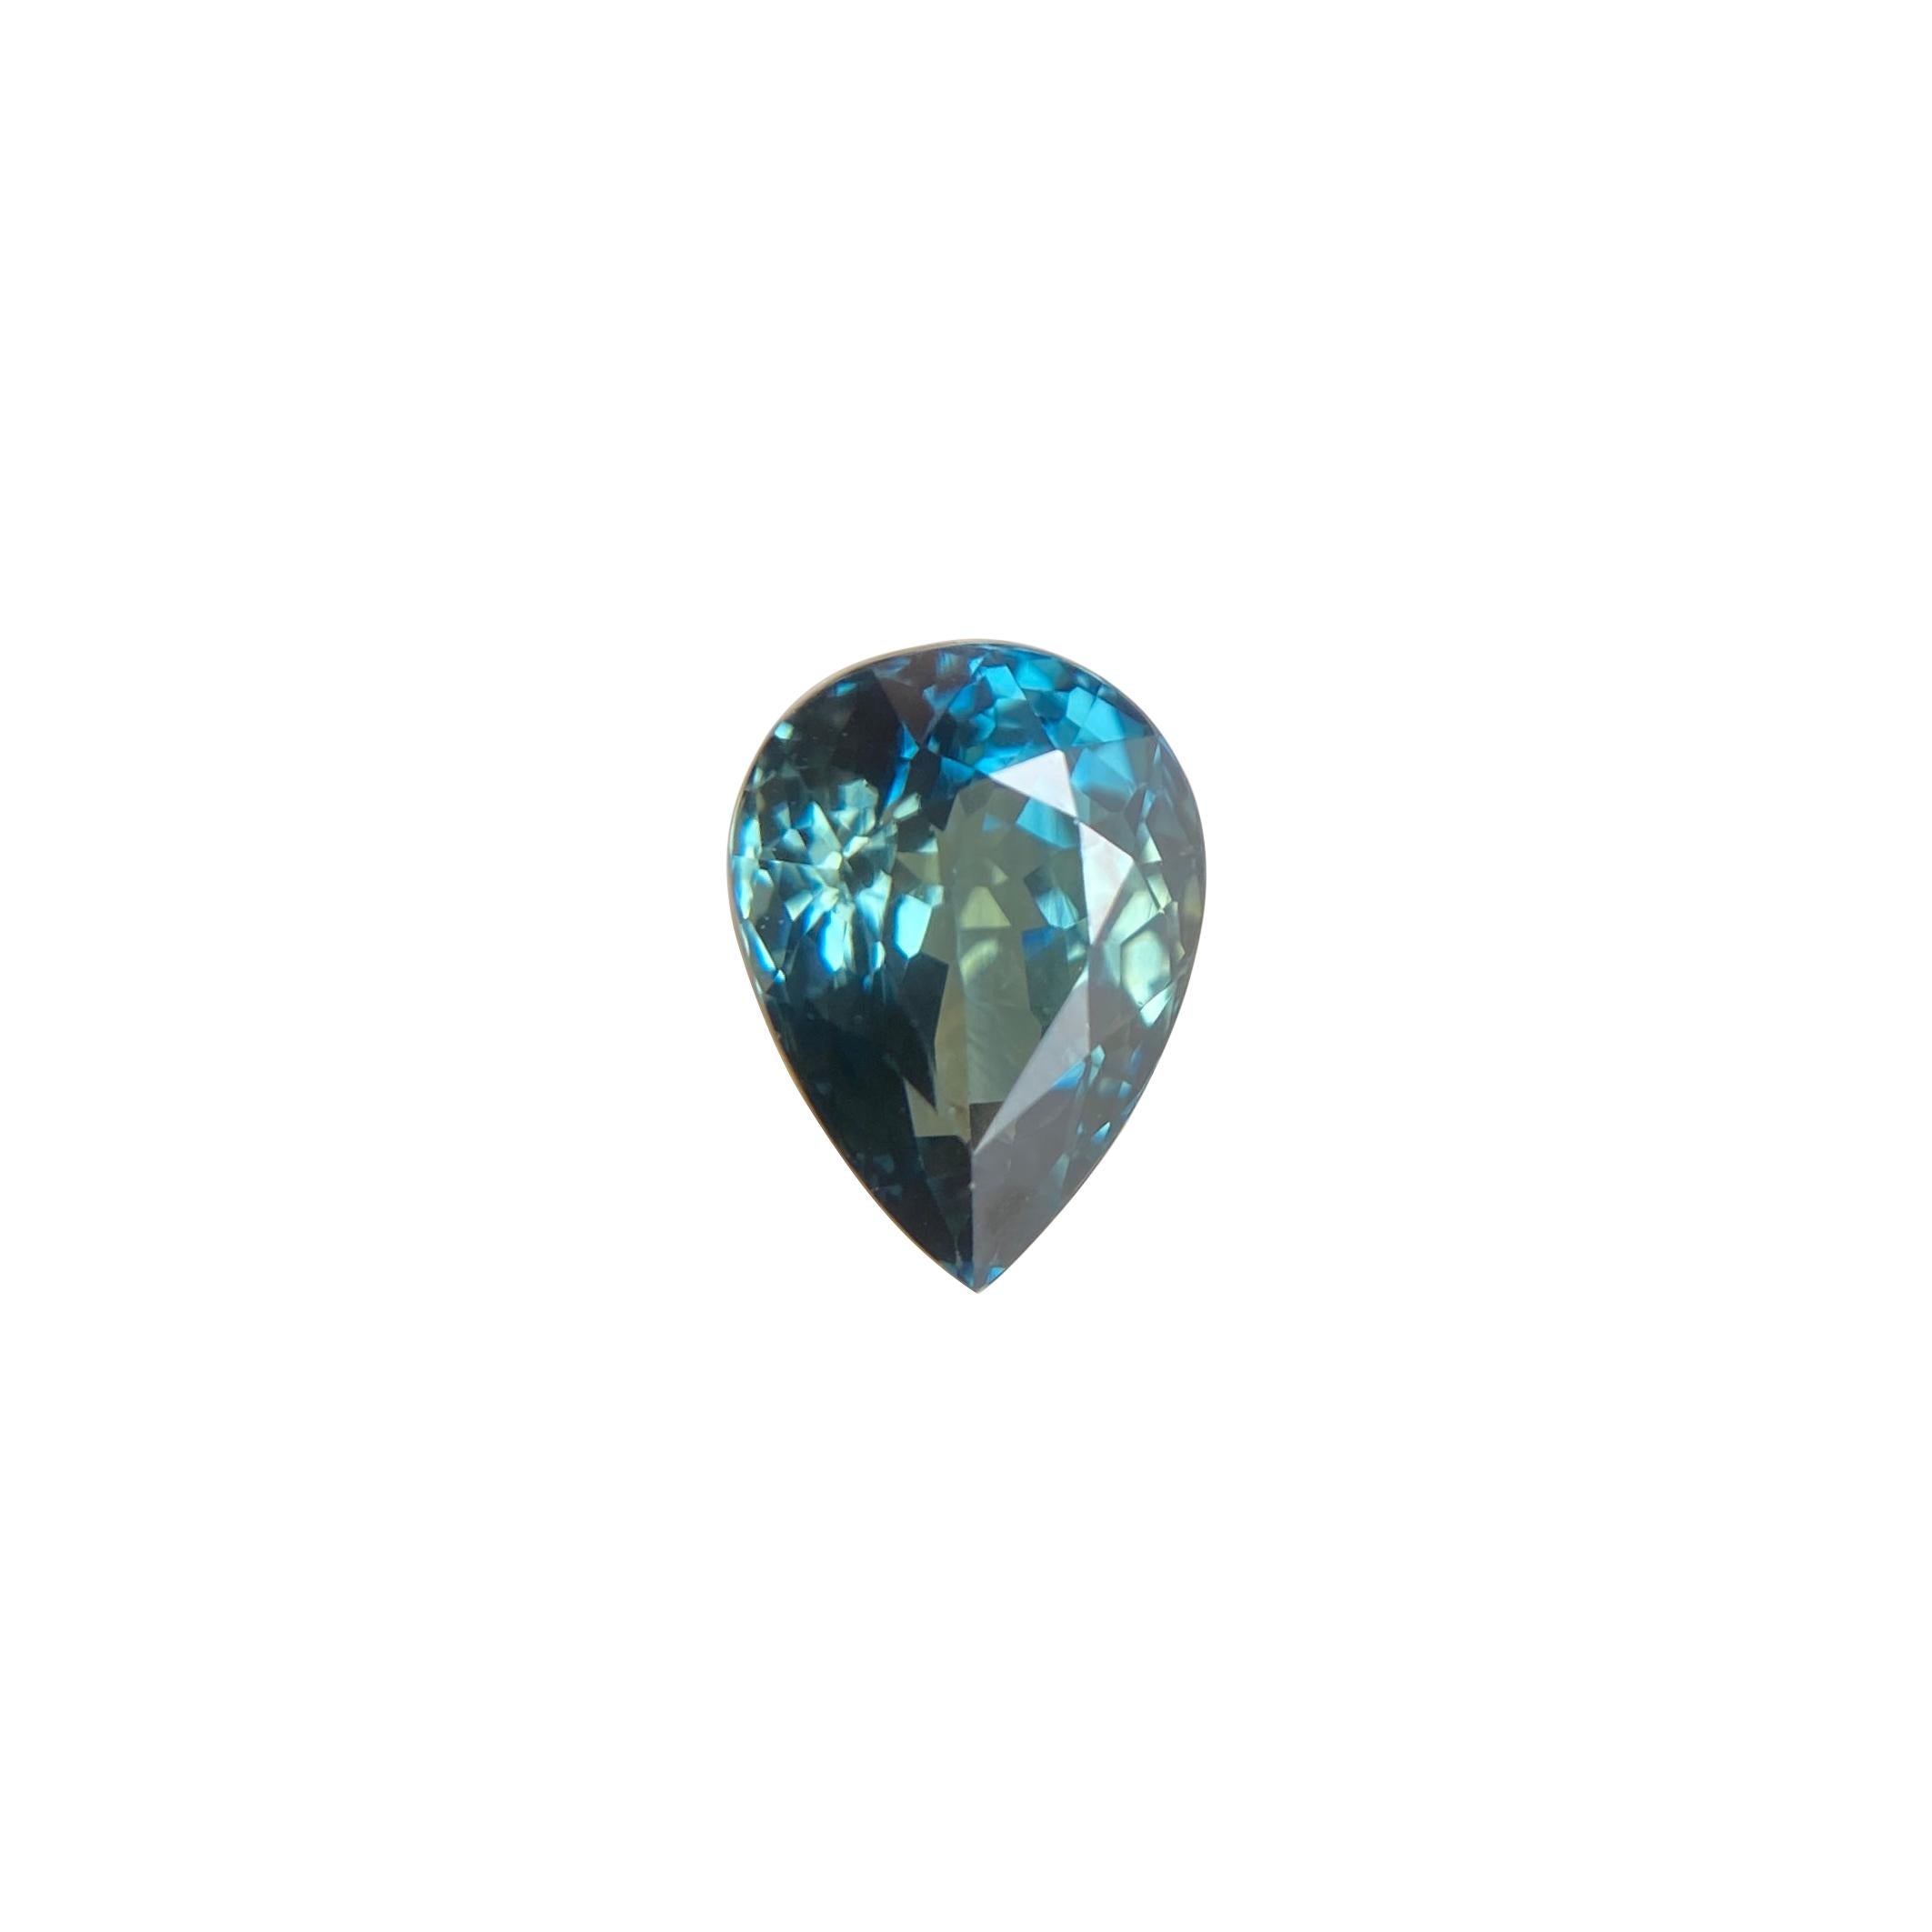 Rare Green Blue Bi Colour Sapphire.

1.55 Carat stone with a beautiful and unique green blue colour. Very rare and stunning to see. Also has an excellent pear teardrop cut and ideal polish to show great shine and colour, would look lovely in